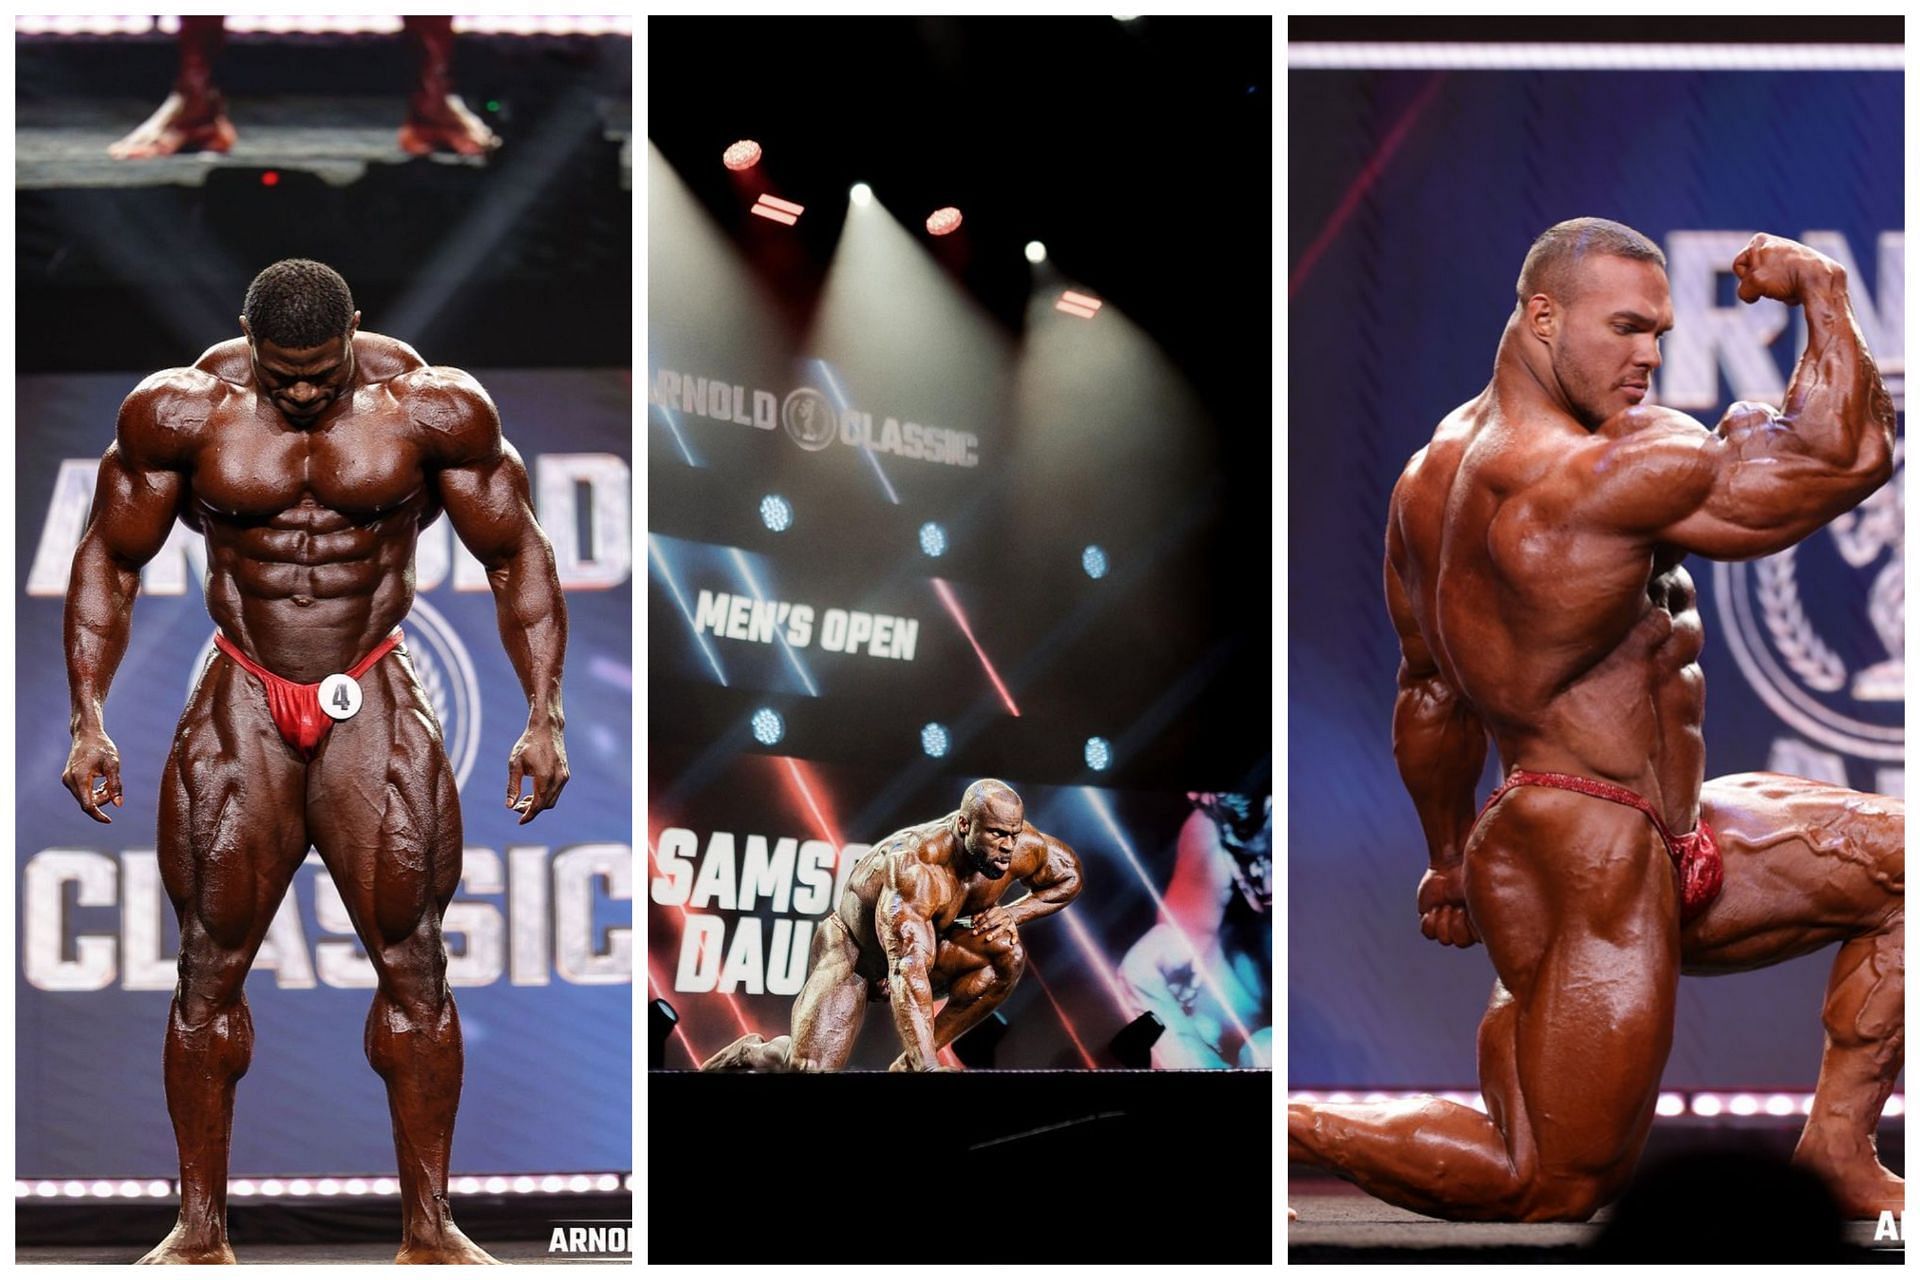 (L-R) Andrew Jacked, Samson Dauda and Nick Walker pose at the 2023 Arnold Classic: Image via Instagram (@samson__dauda / @andrewjacked / @nick_walker39)